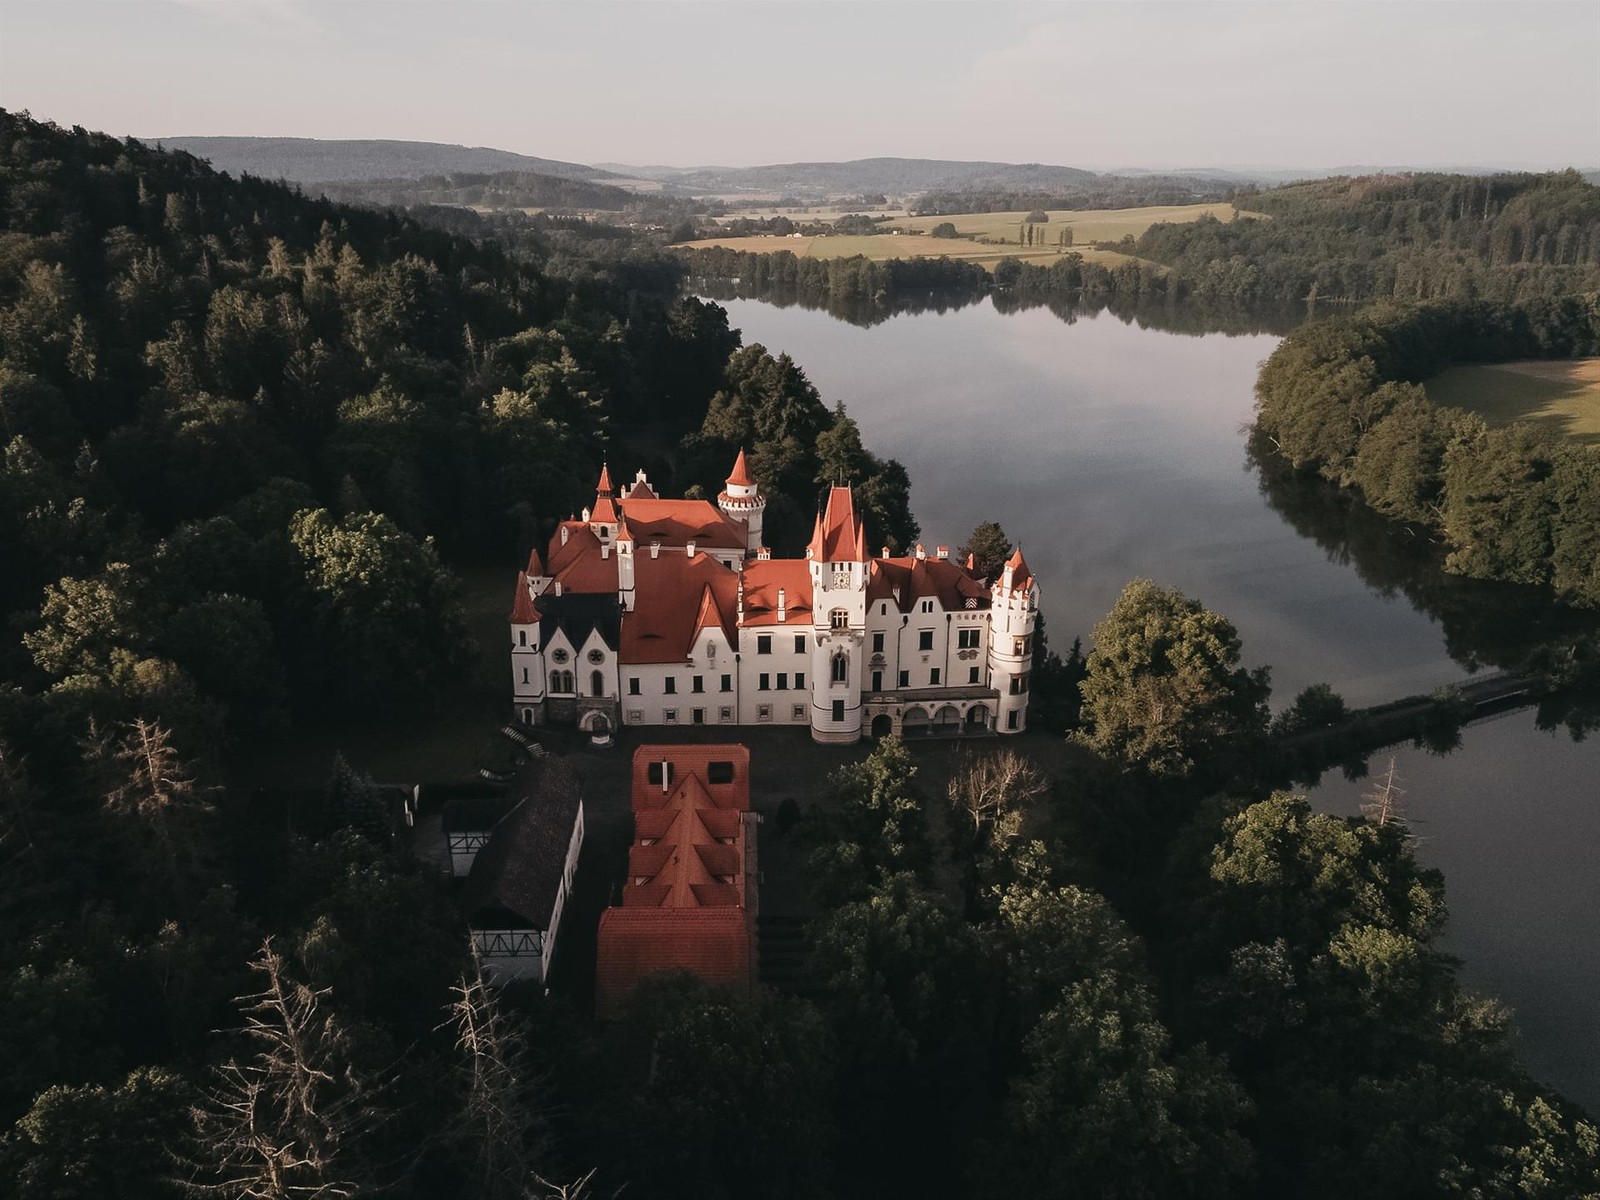 This Neo-Renaissance castle in the Pilsen region of the Czech Republic, dates from the 12th century.